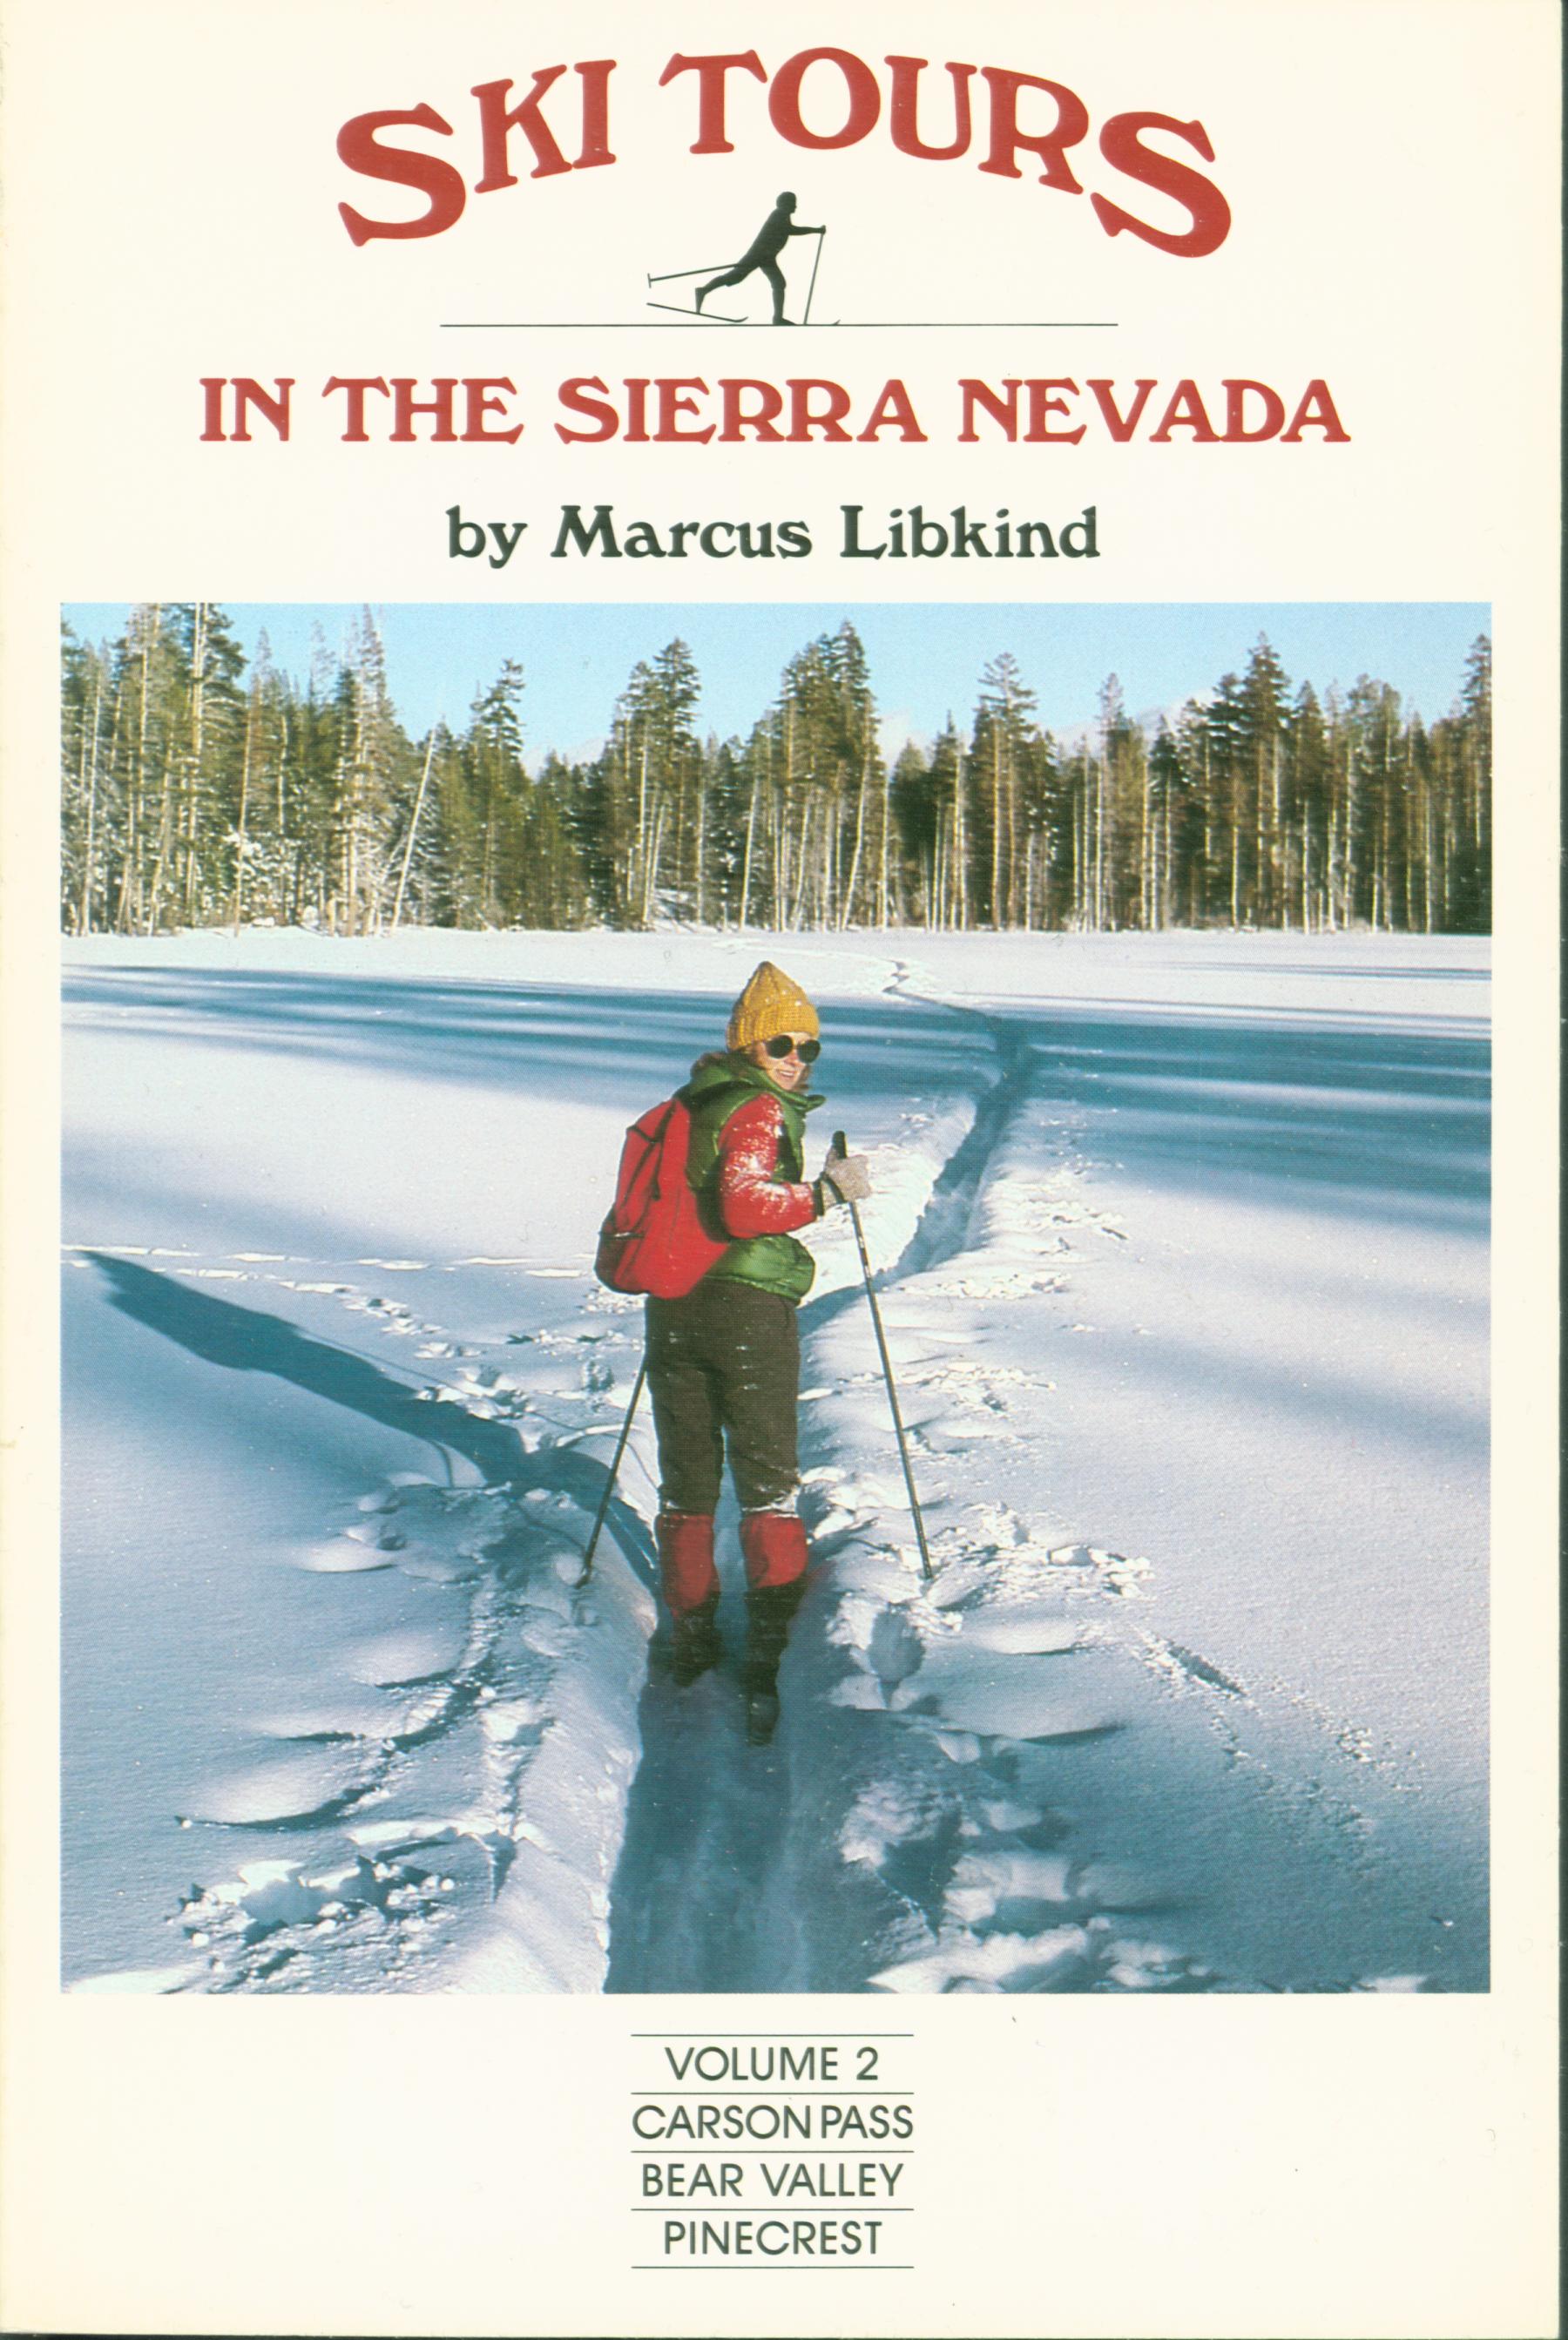 SKI TOURS IN THE SIERRA NEVADA: Carson Pass, Bear Valley, and Pinecrest--volume 2.